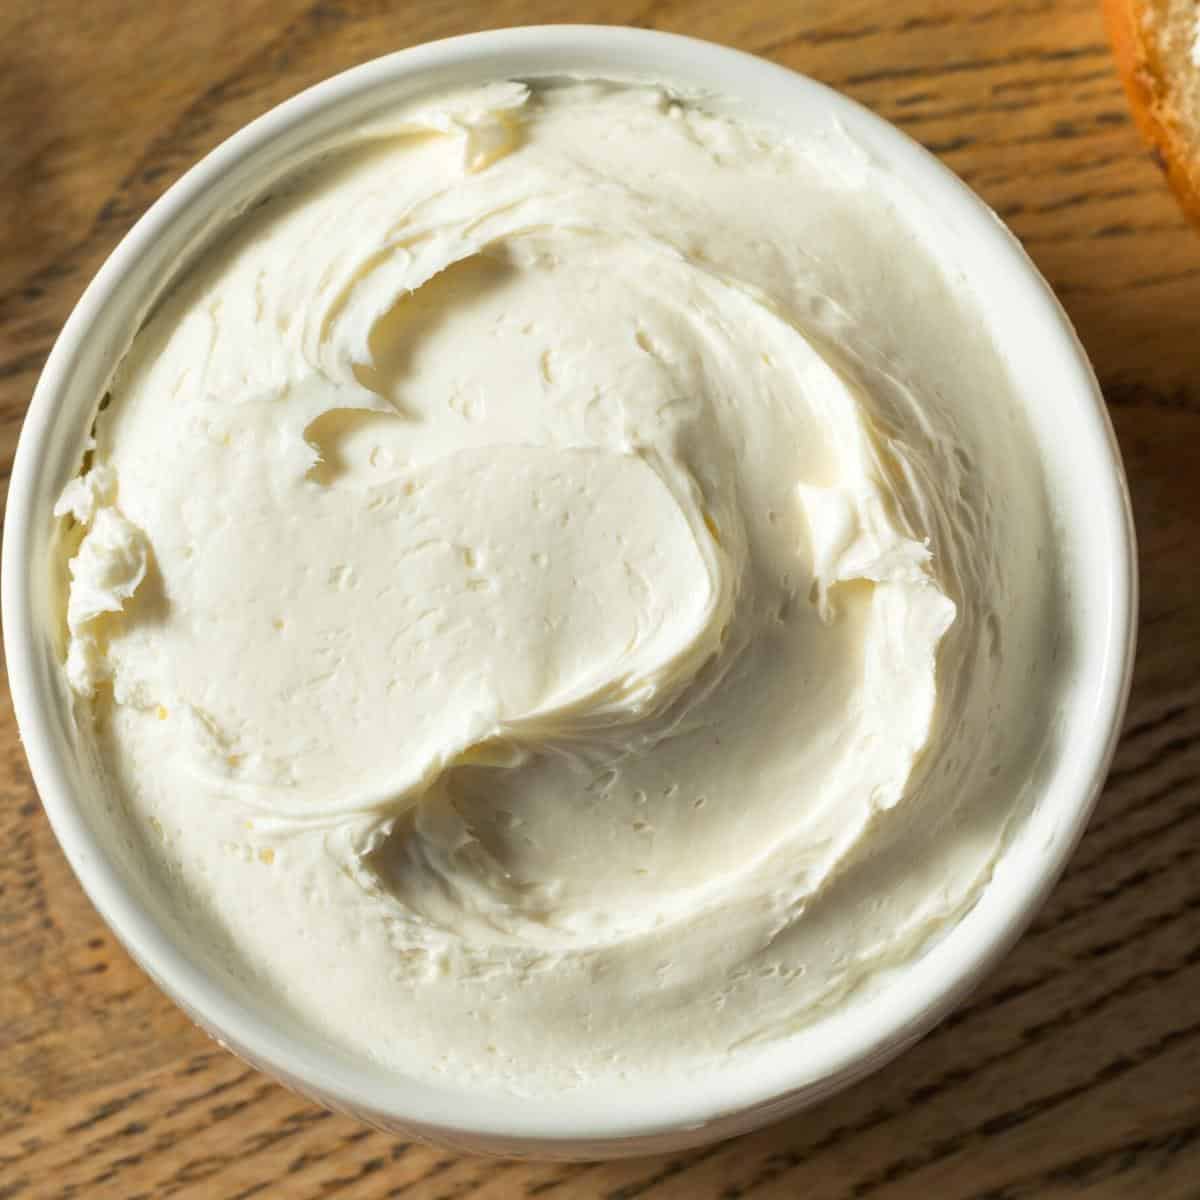 A freshly made frosting with cream cheese.